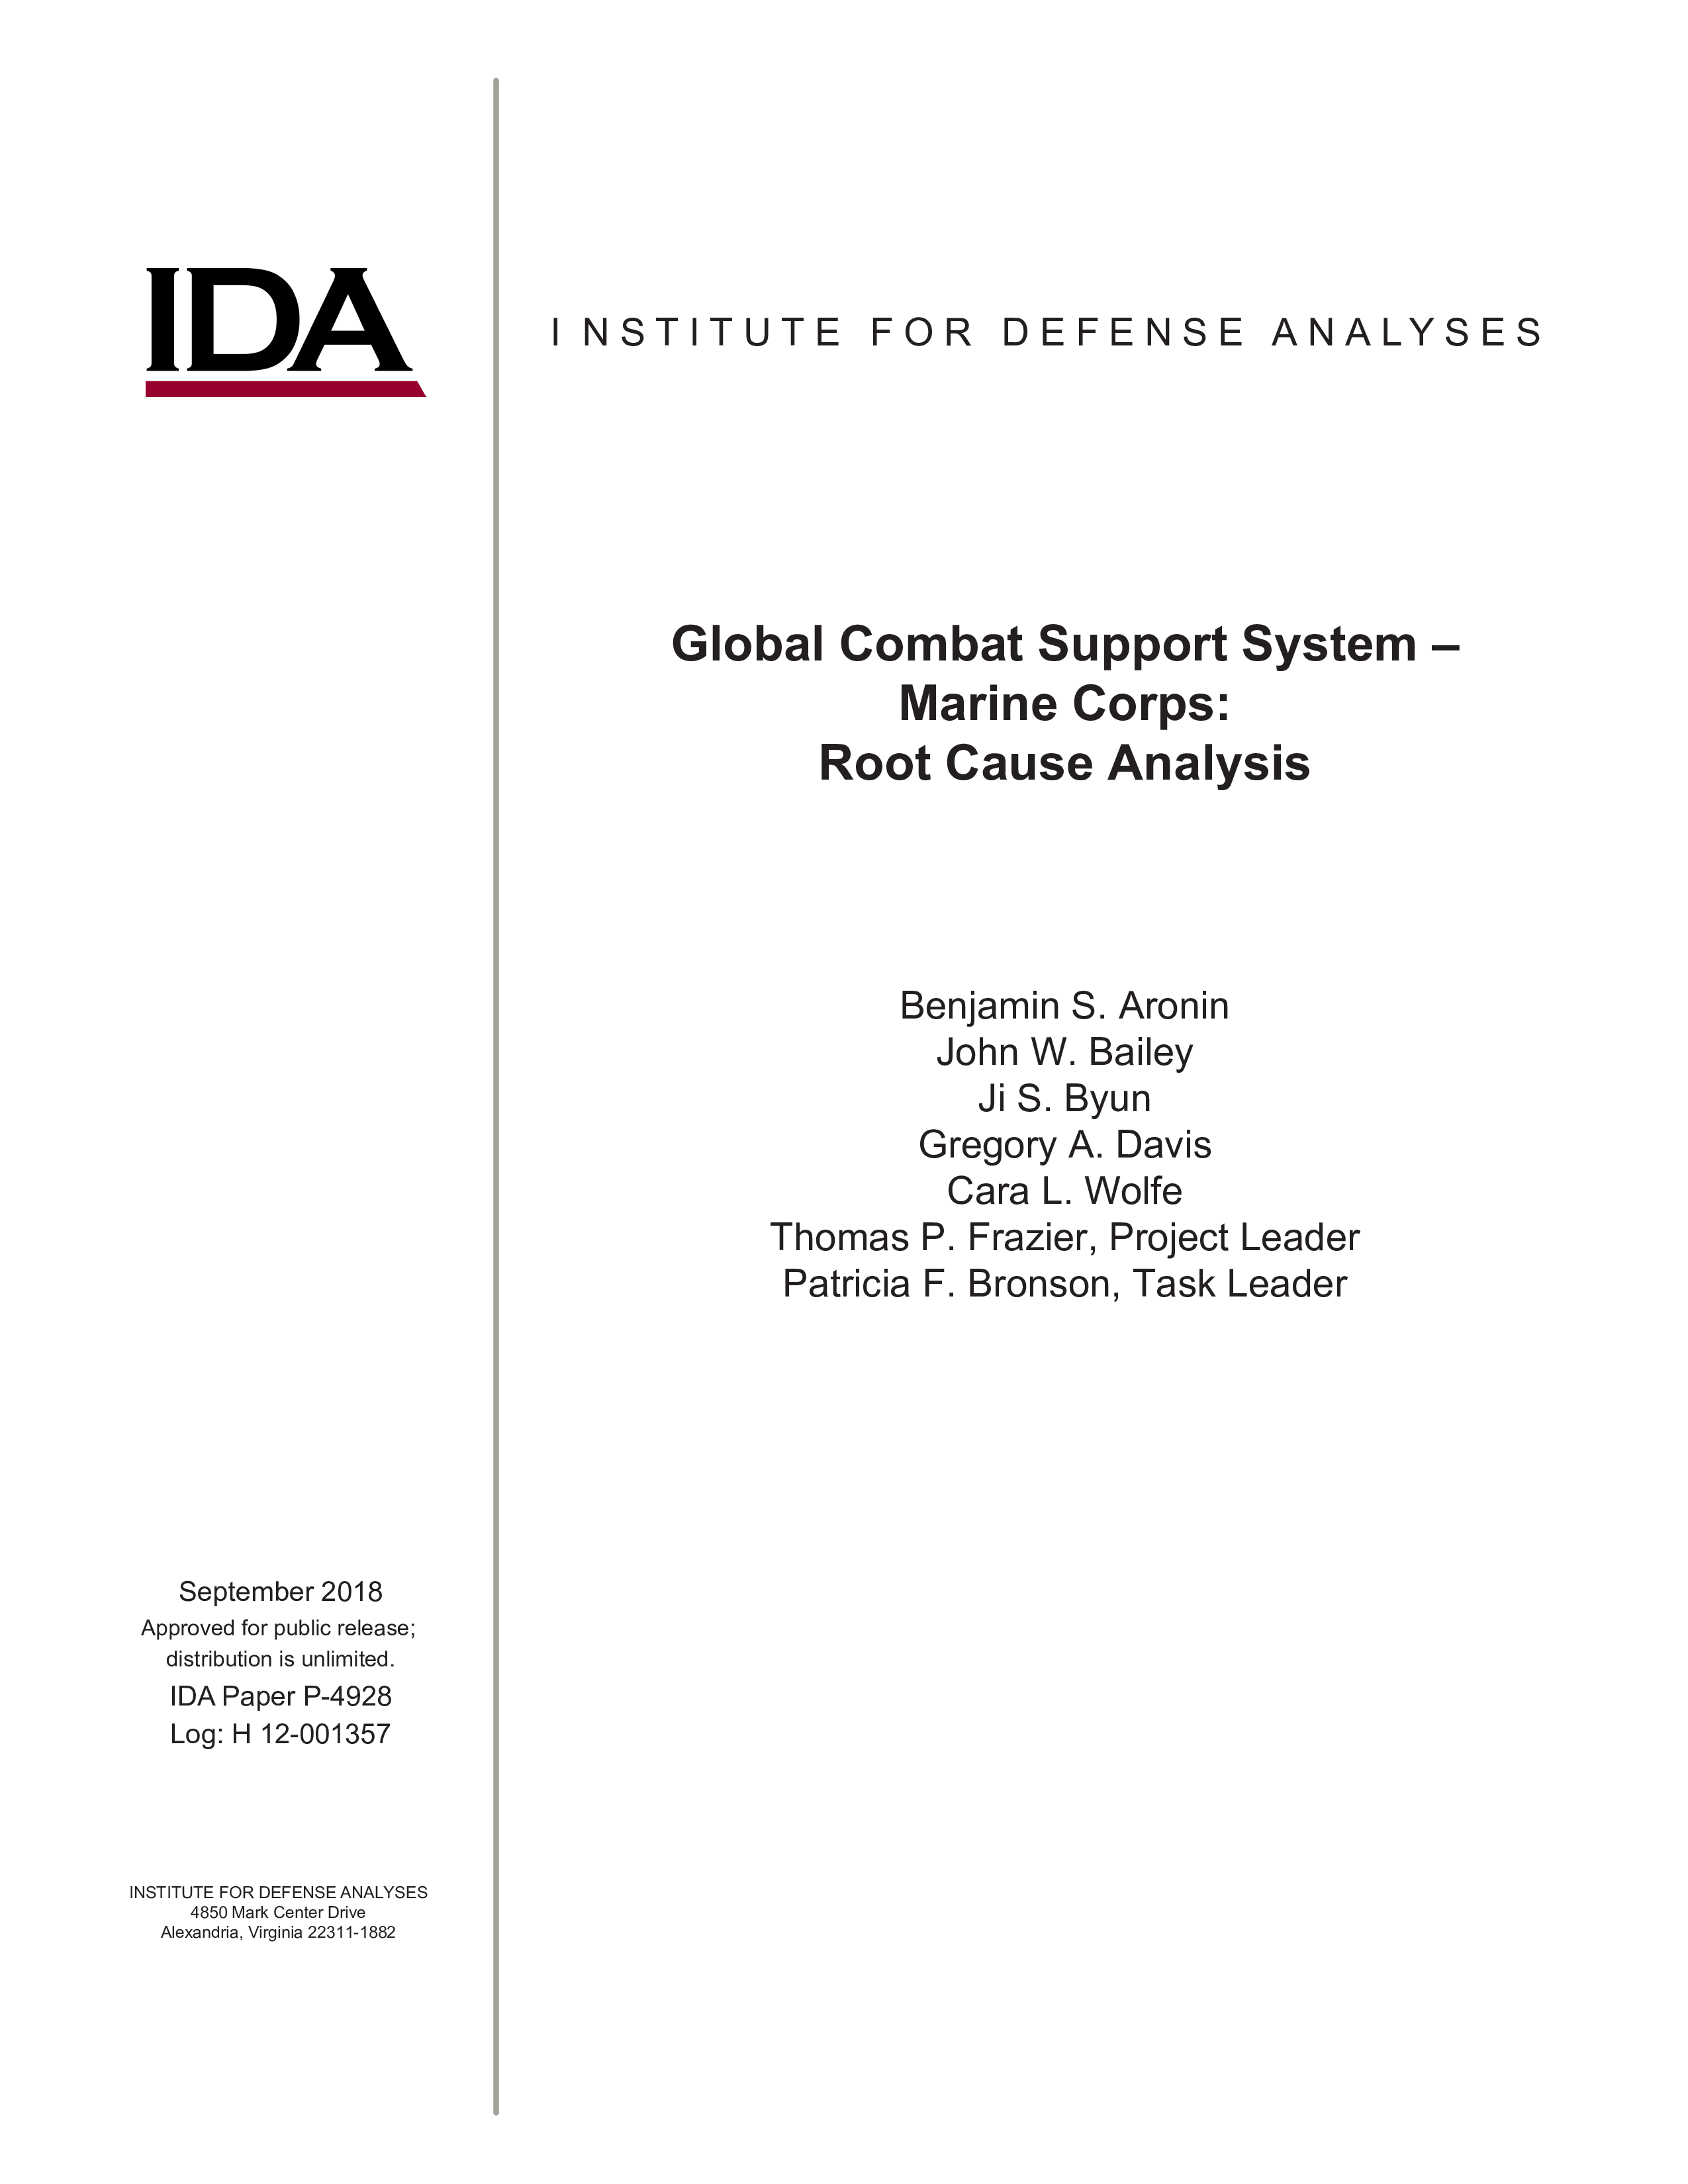 Global Combat Support System – Marine Corps: Root Cause Analysis